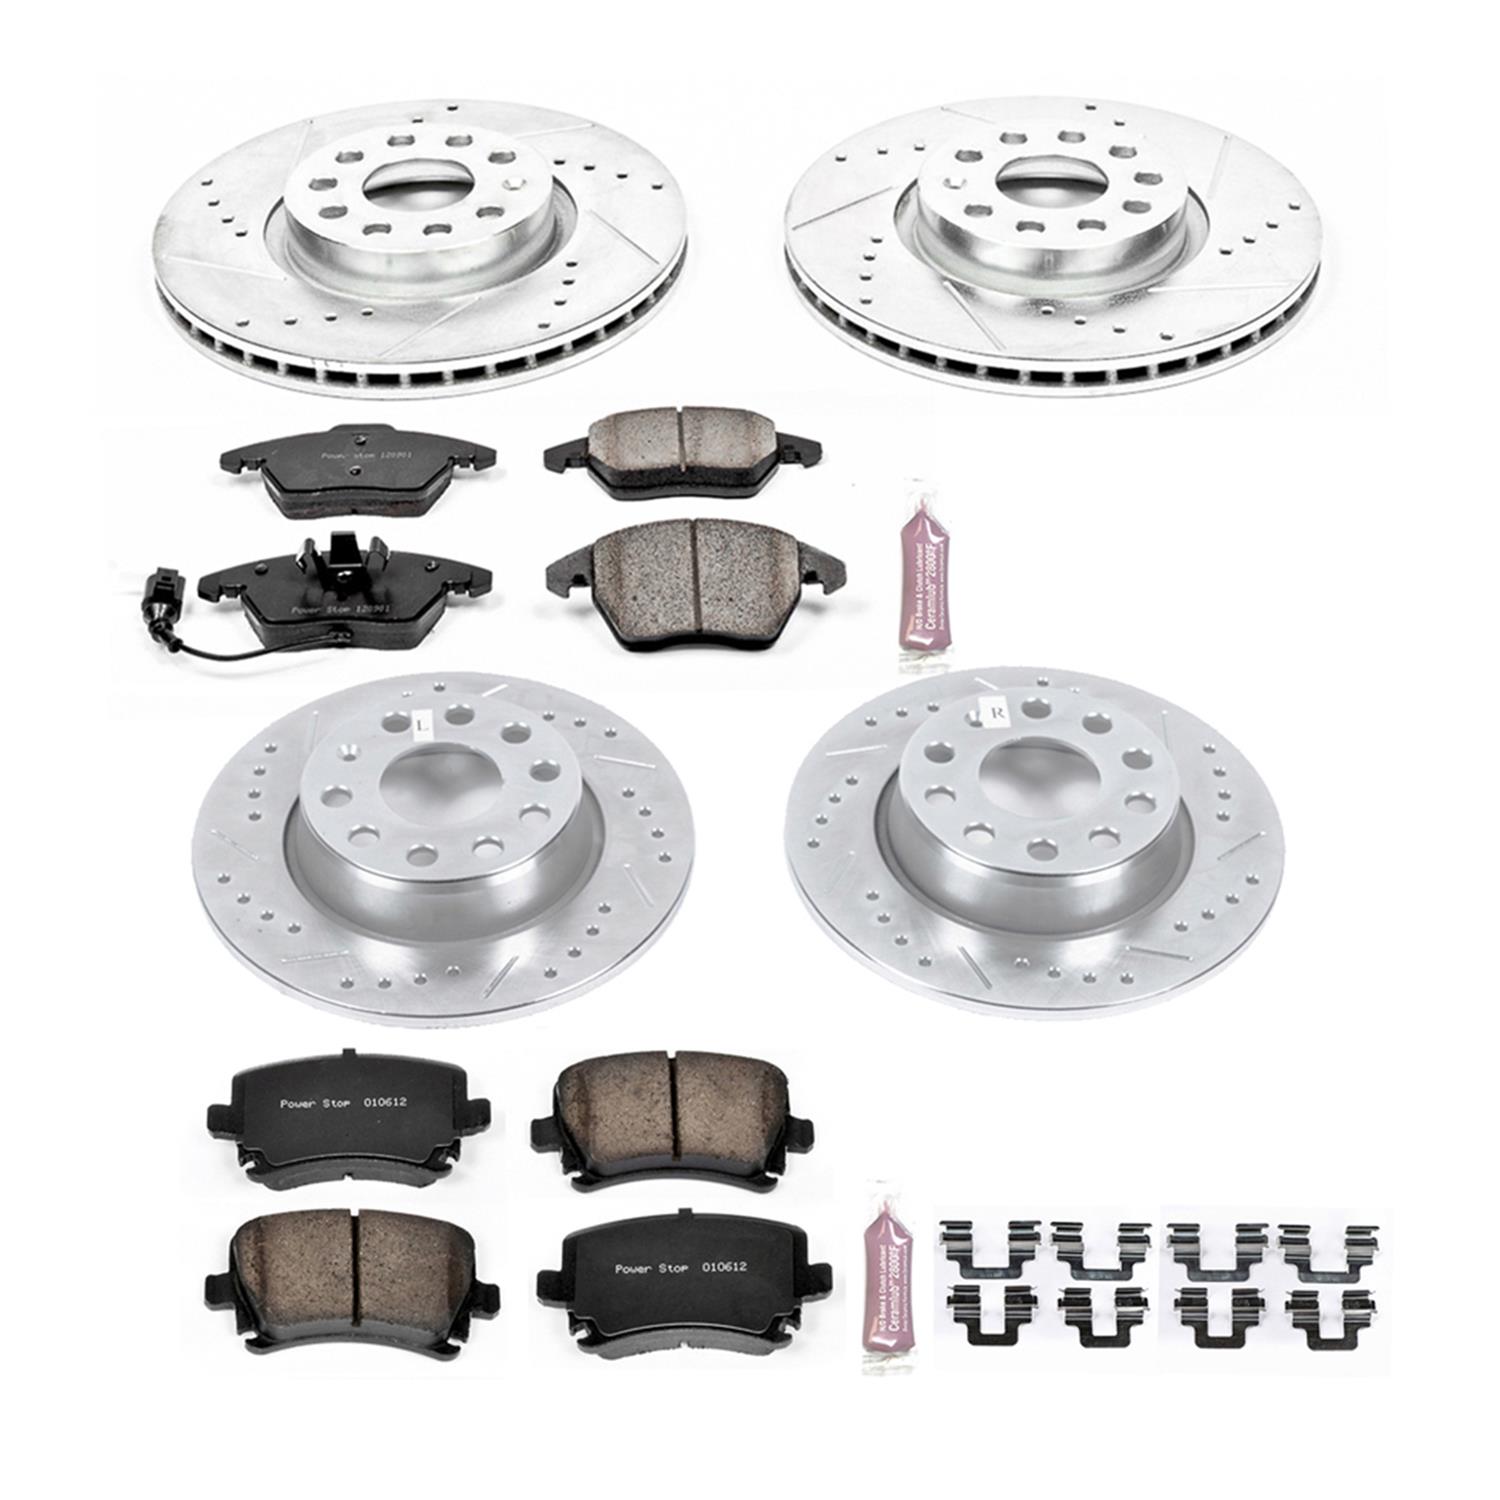 Power Stop K5800 Front and Rear Z23 Evolution Brake Kit with Drilled/Slotted Rotors and Ceramic Brake Pads 